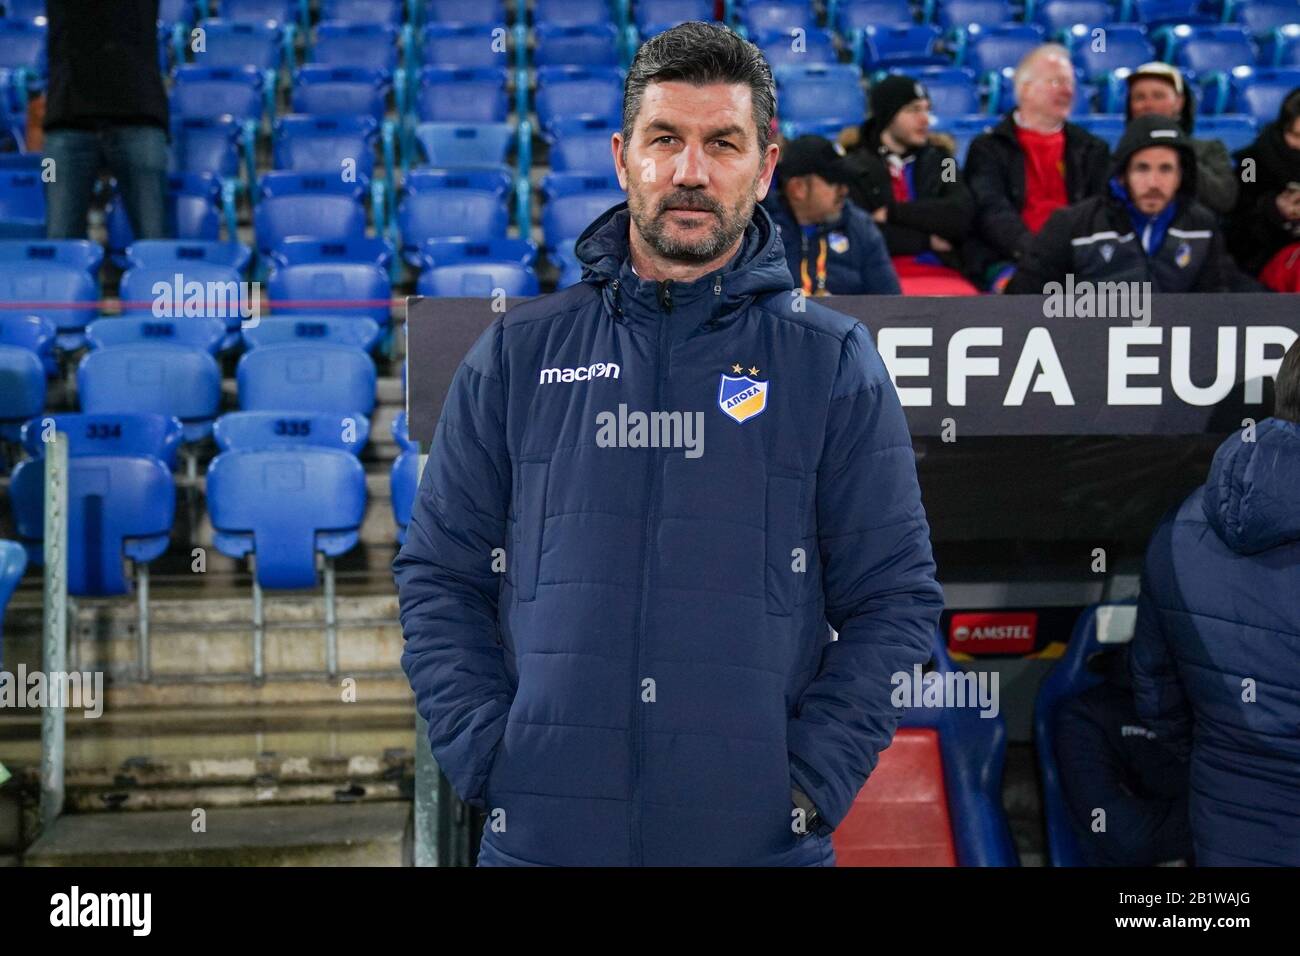 Coach Of Apoel Fc High Resolution Stock Photography and Images - Alamy